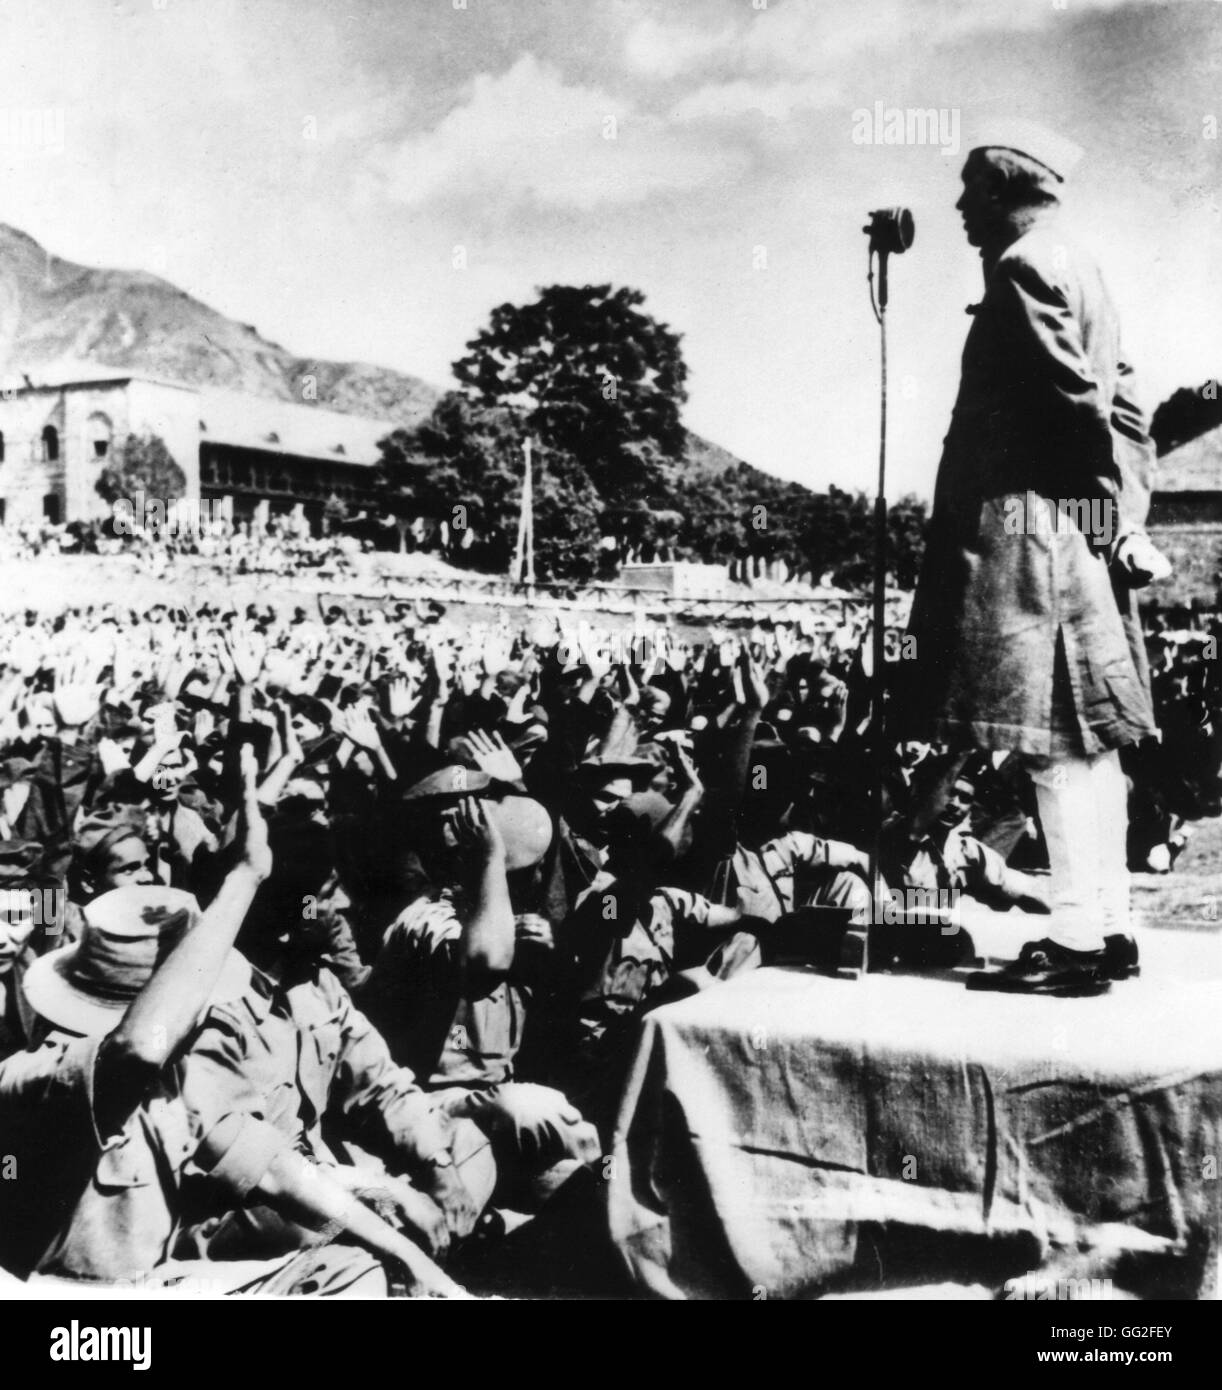 During a visit to Kashmir, prime minister of India, Pandit Nehru, delivered a speech to Indian troops of the area. Here he stands, at the right, during his speech June 27, 1949 India - Kashmir National Archives - Washington Stock Photo